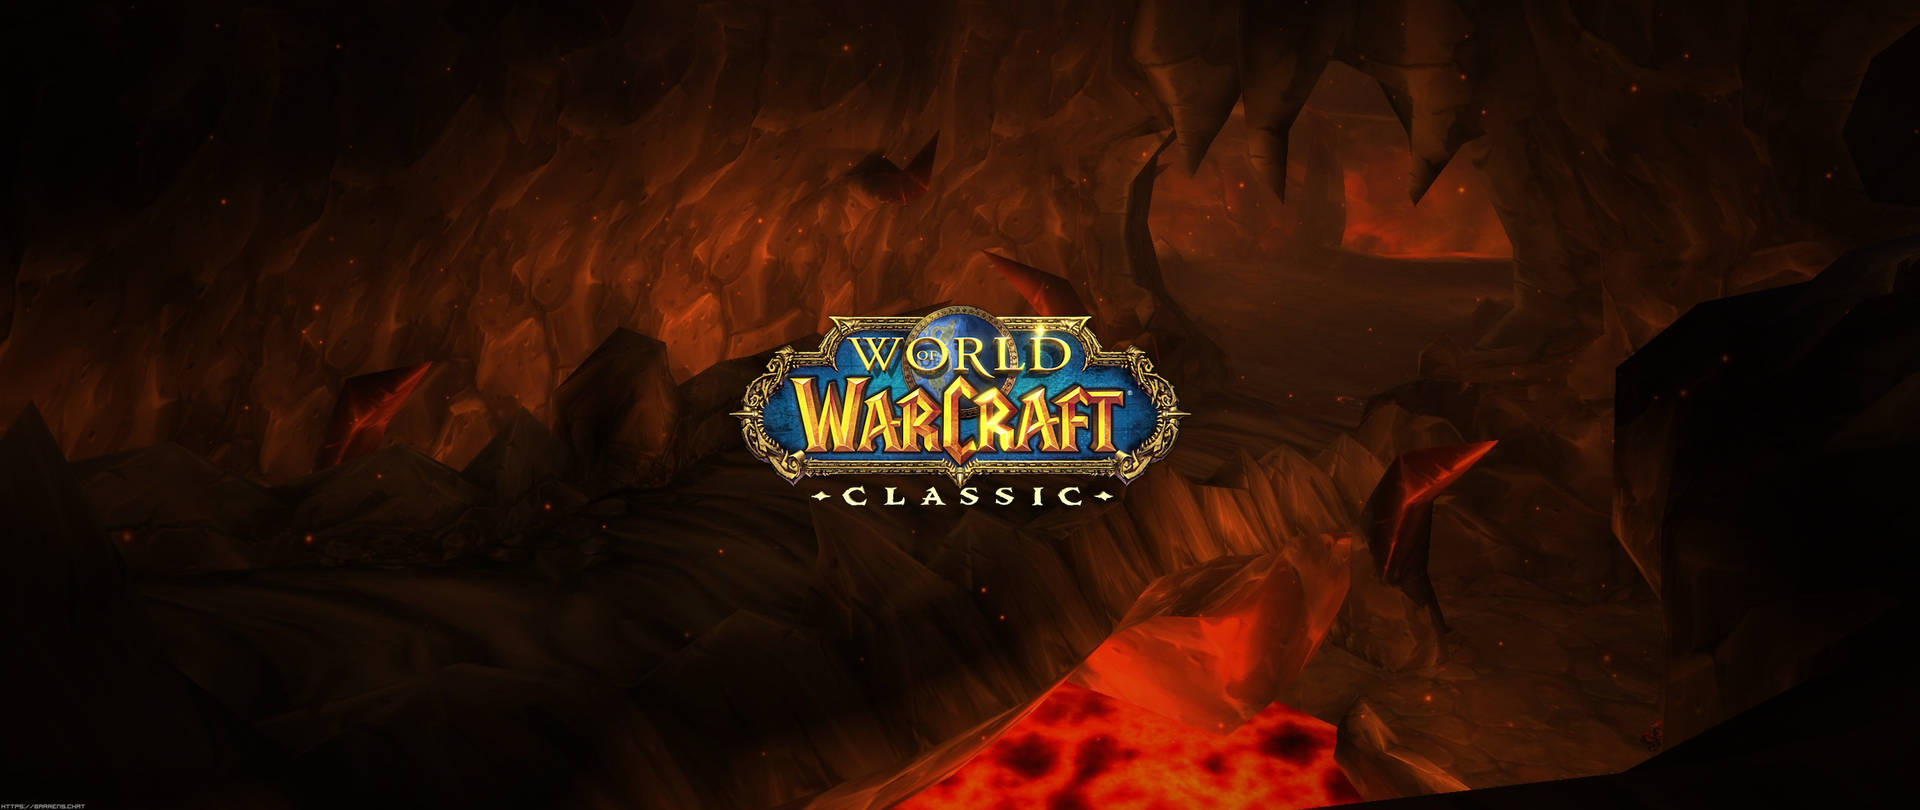 Ultrawide World of Warcraft title on center of a fiery rocky dungeon.